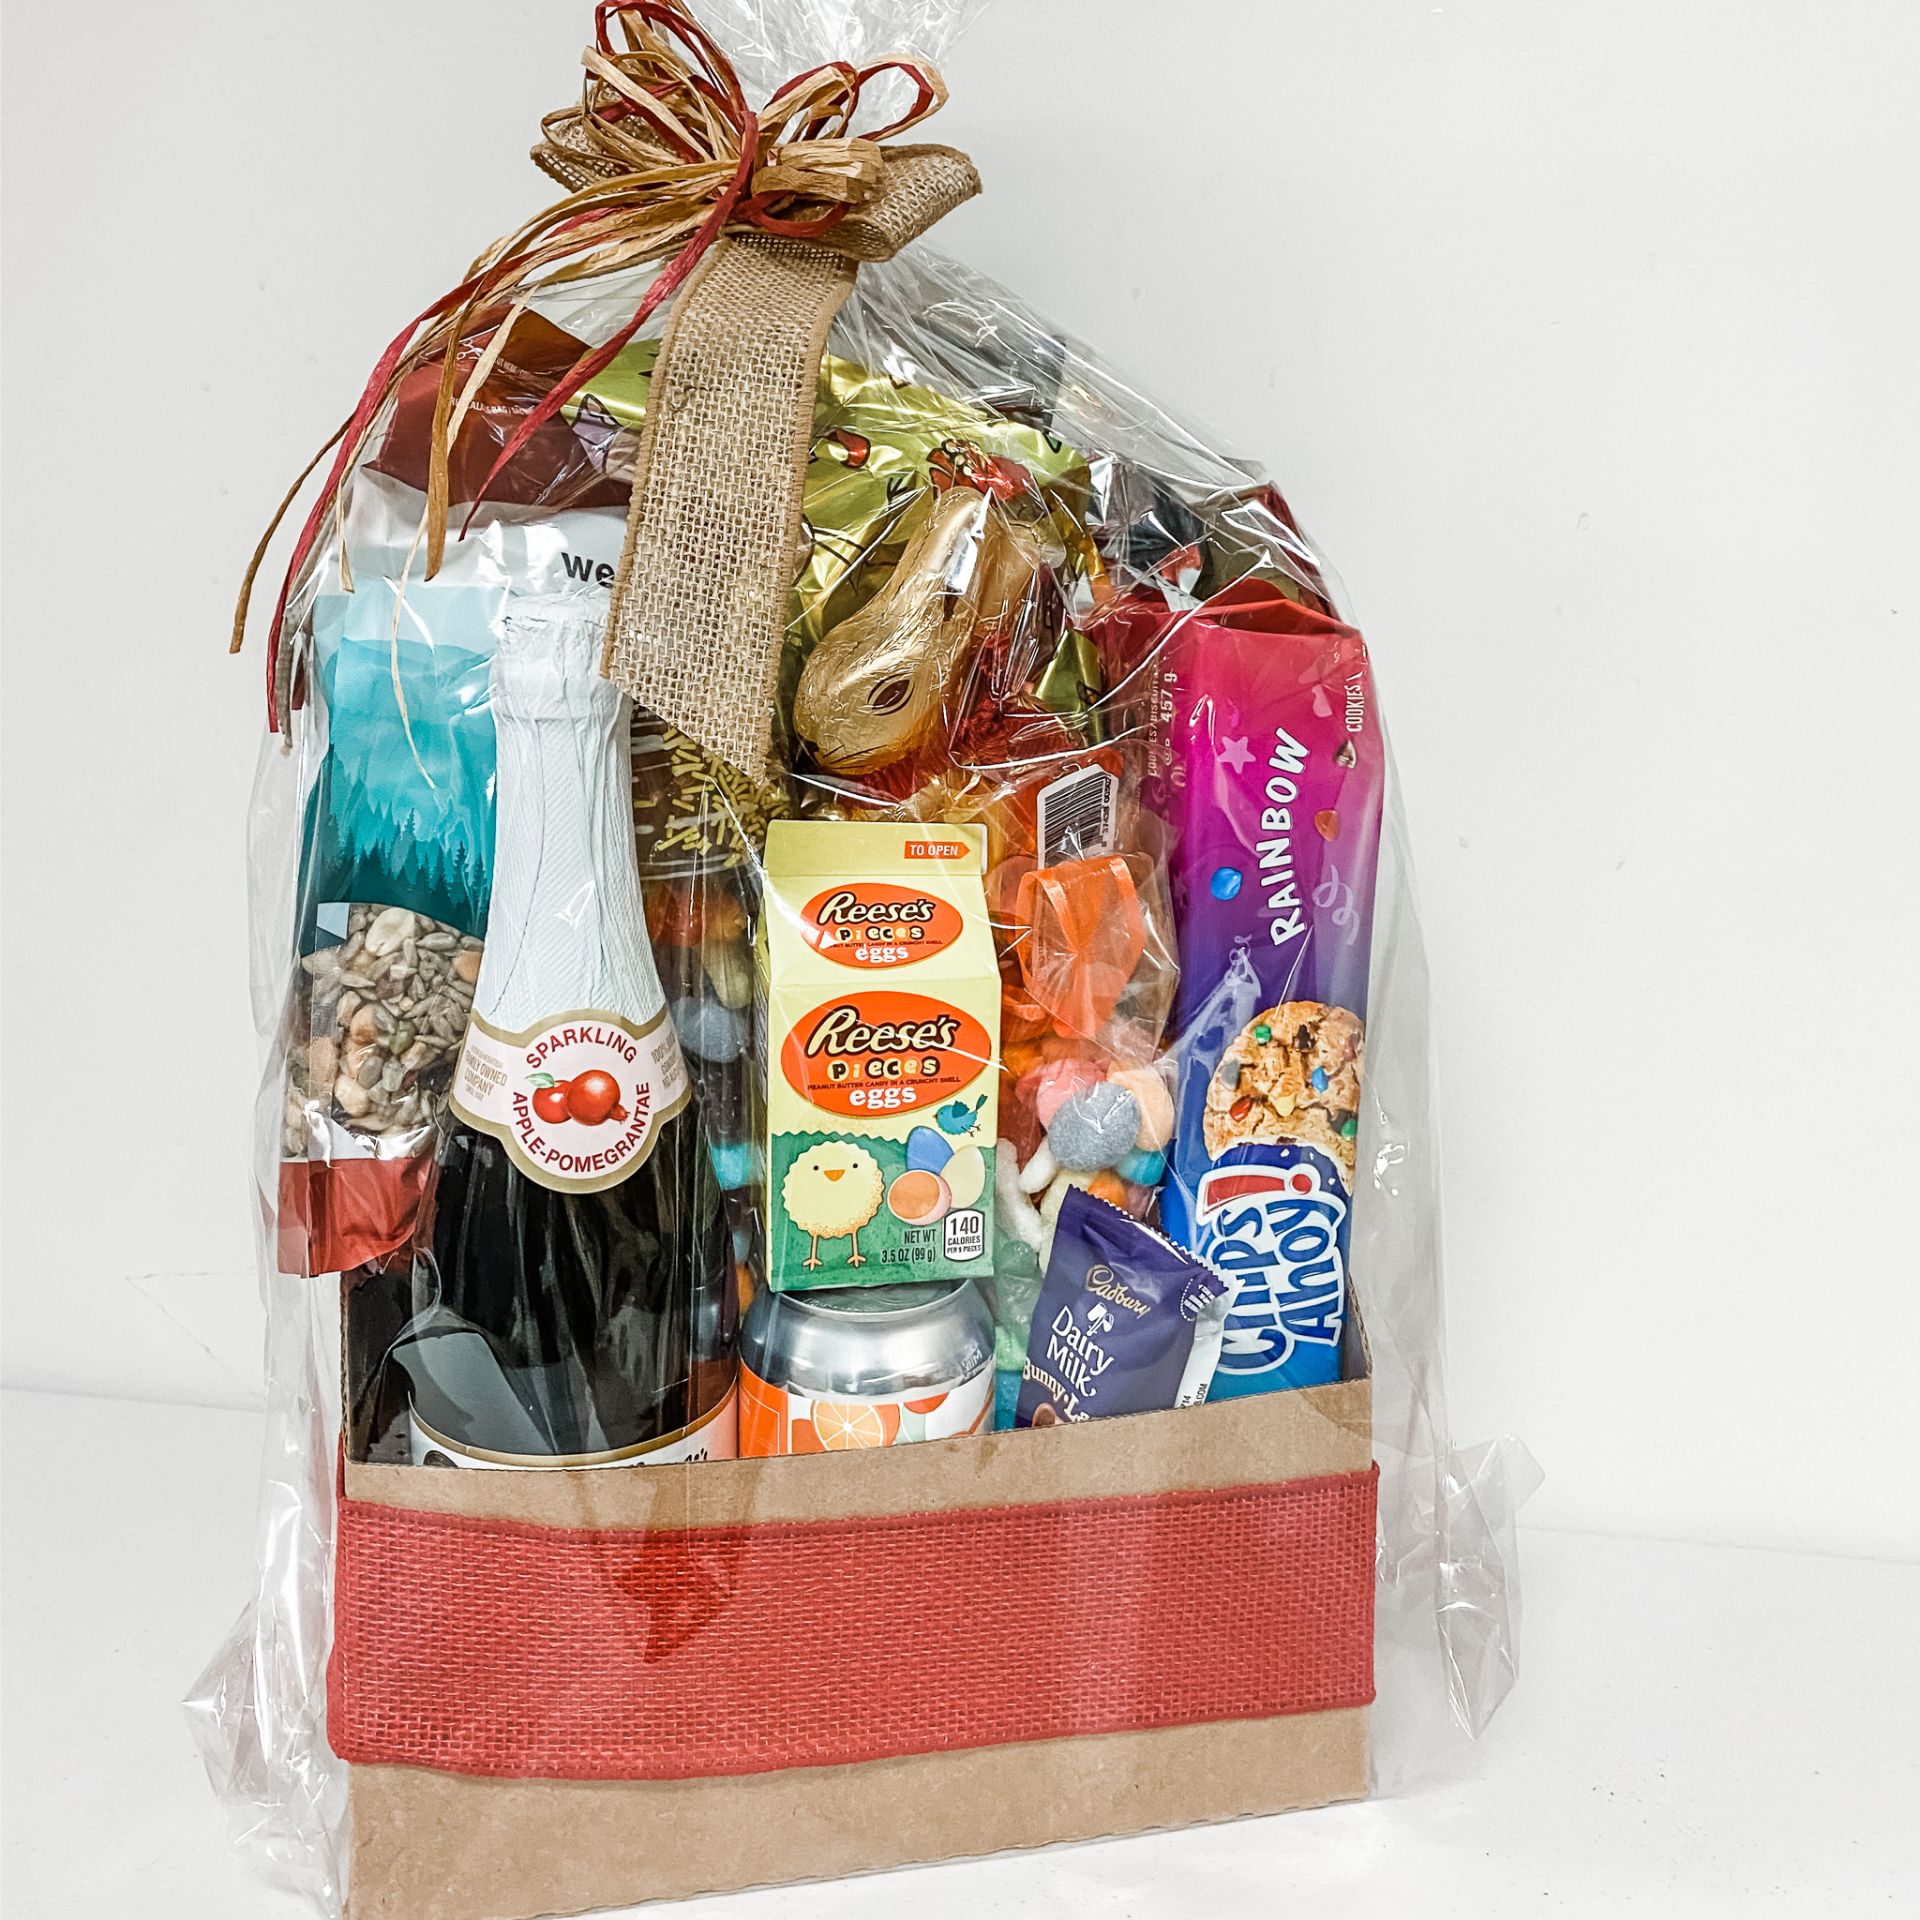 Gift Basket - Gift Basket featuring select Freson Bros. products. - Freson Bros, Valleyview